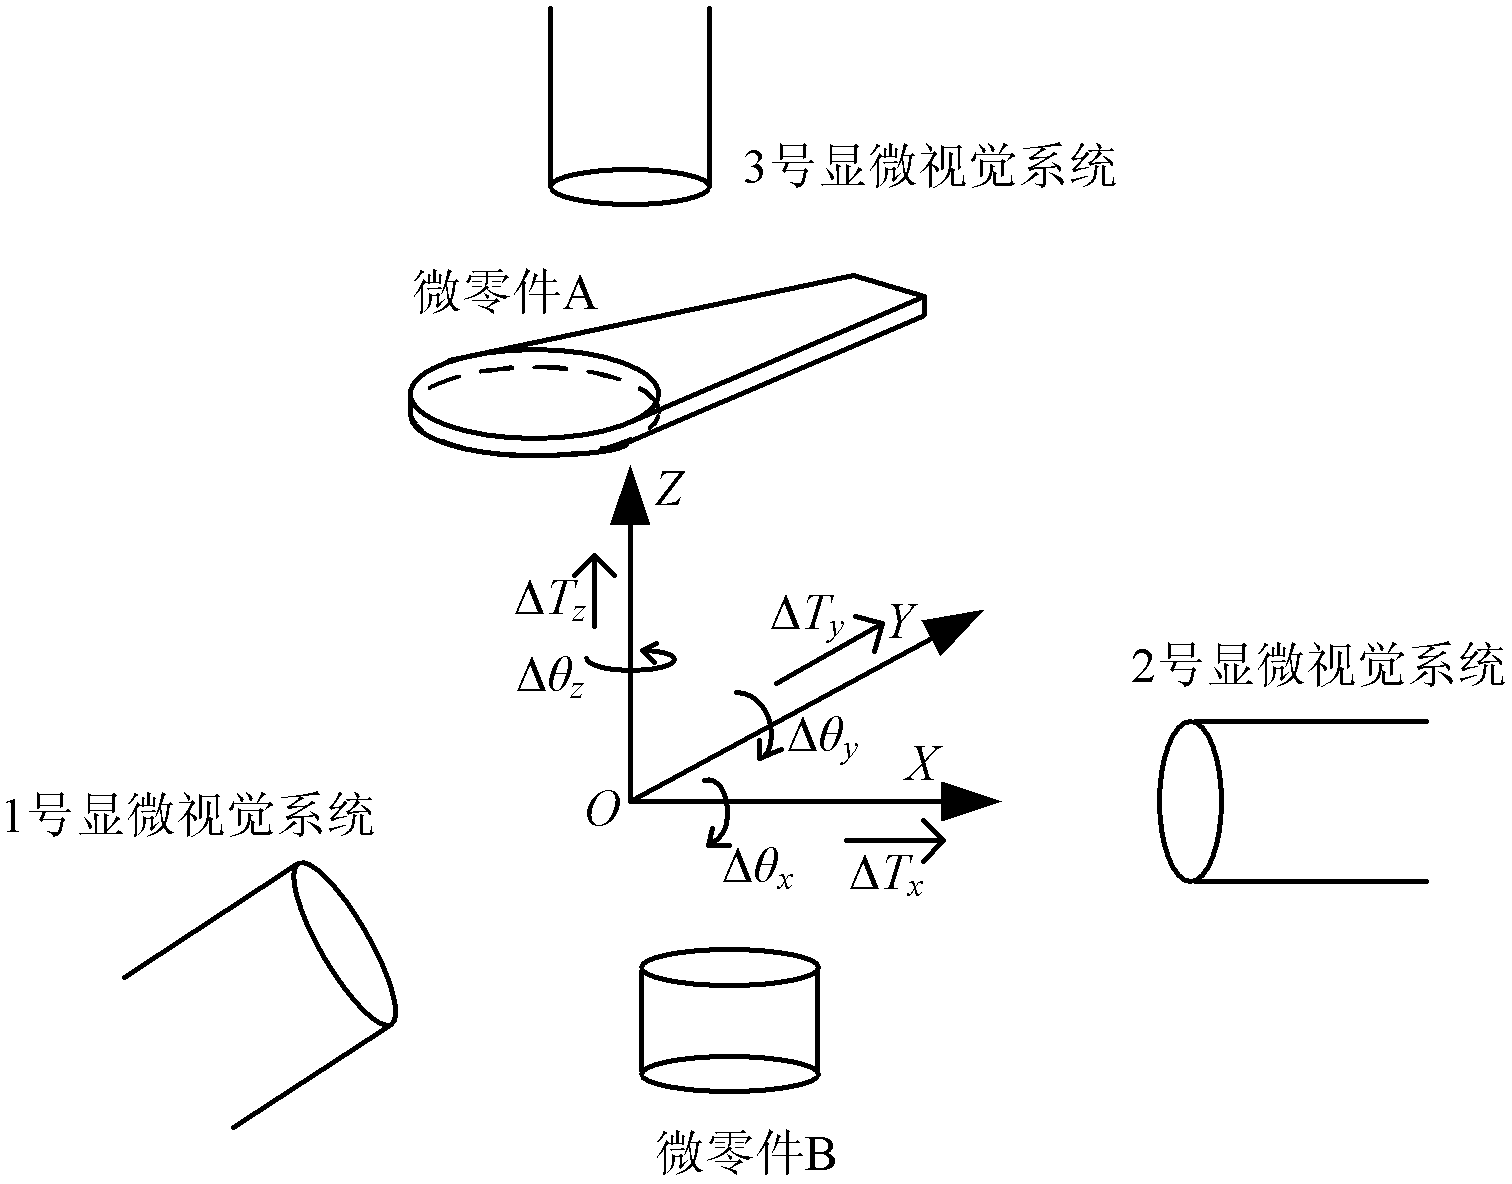 Micro part assembly system and online assembly method of micro parts